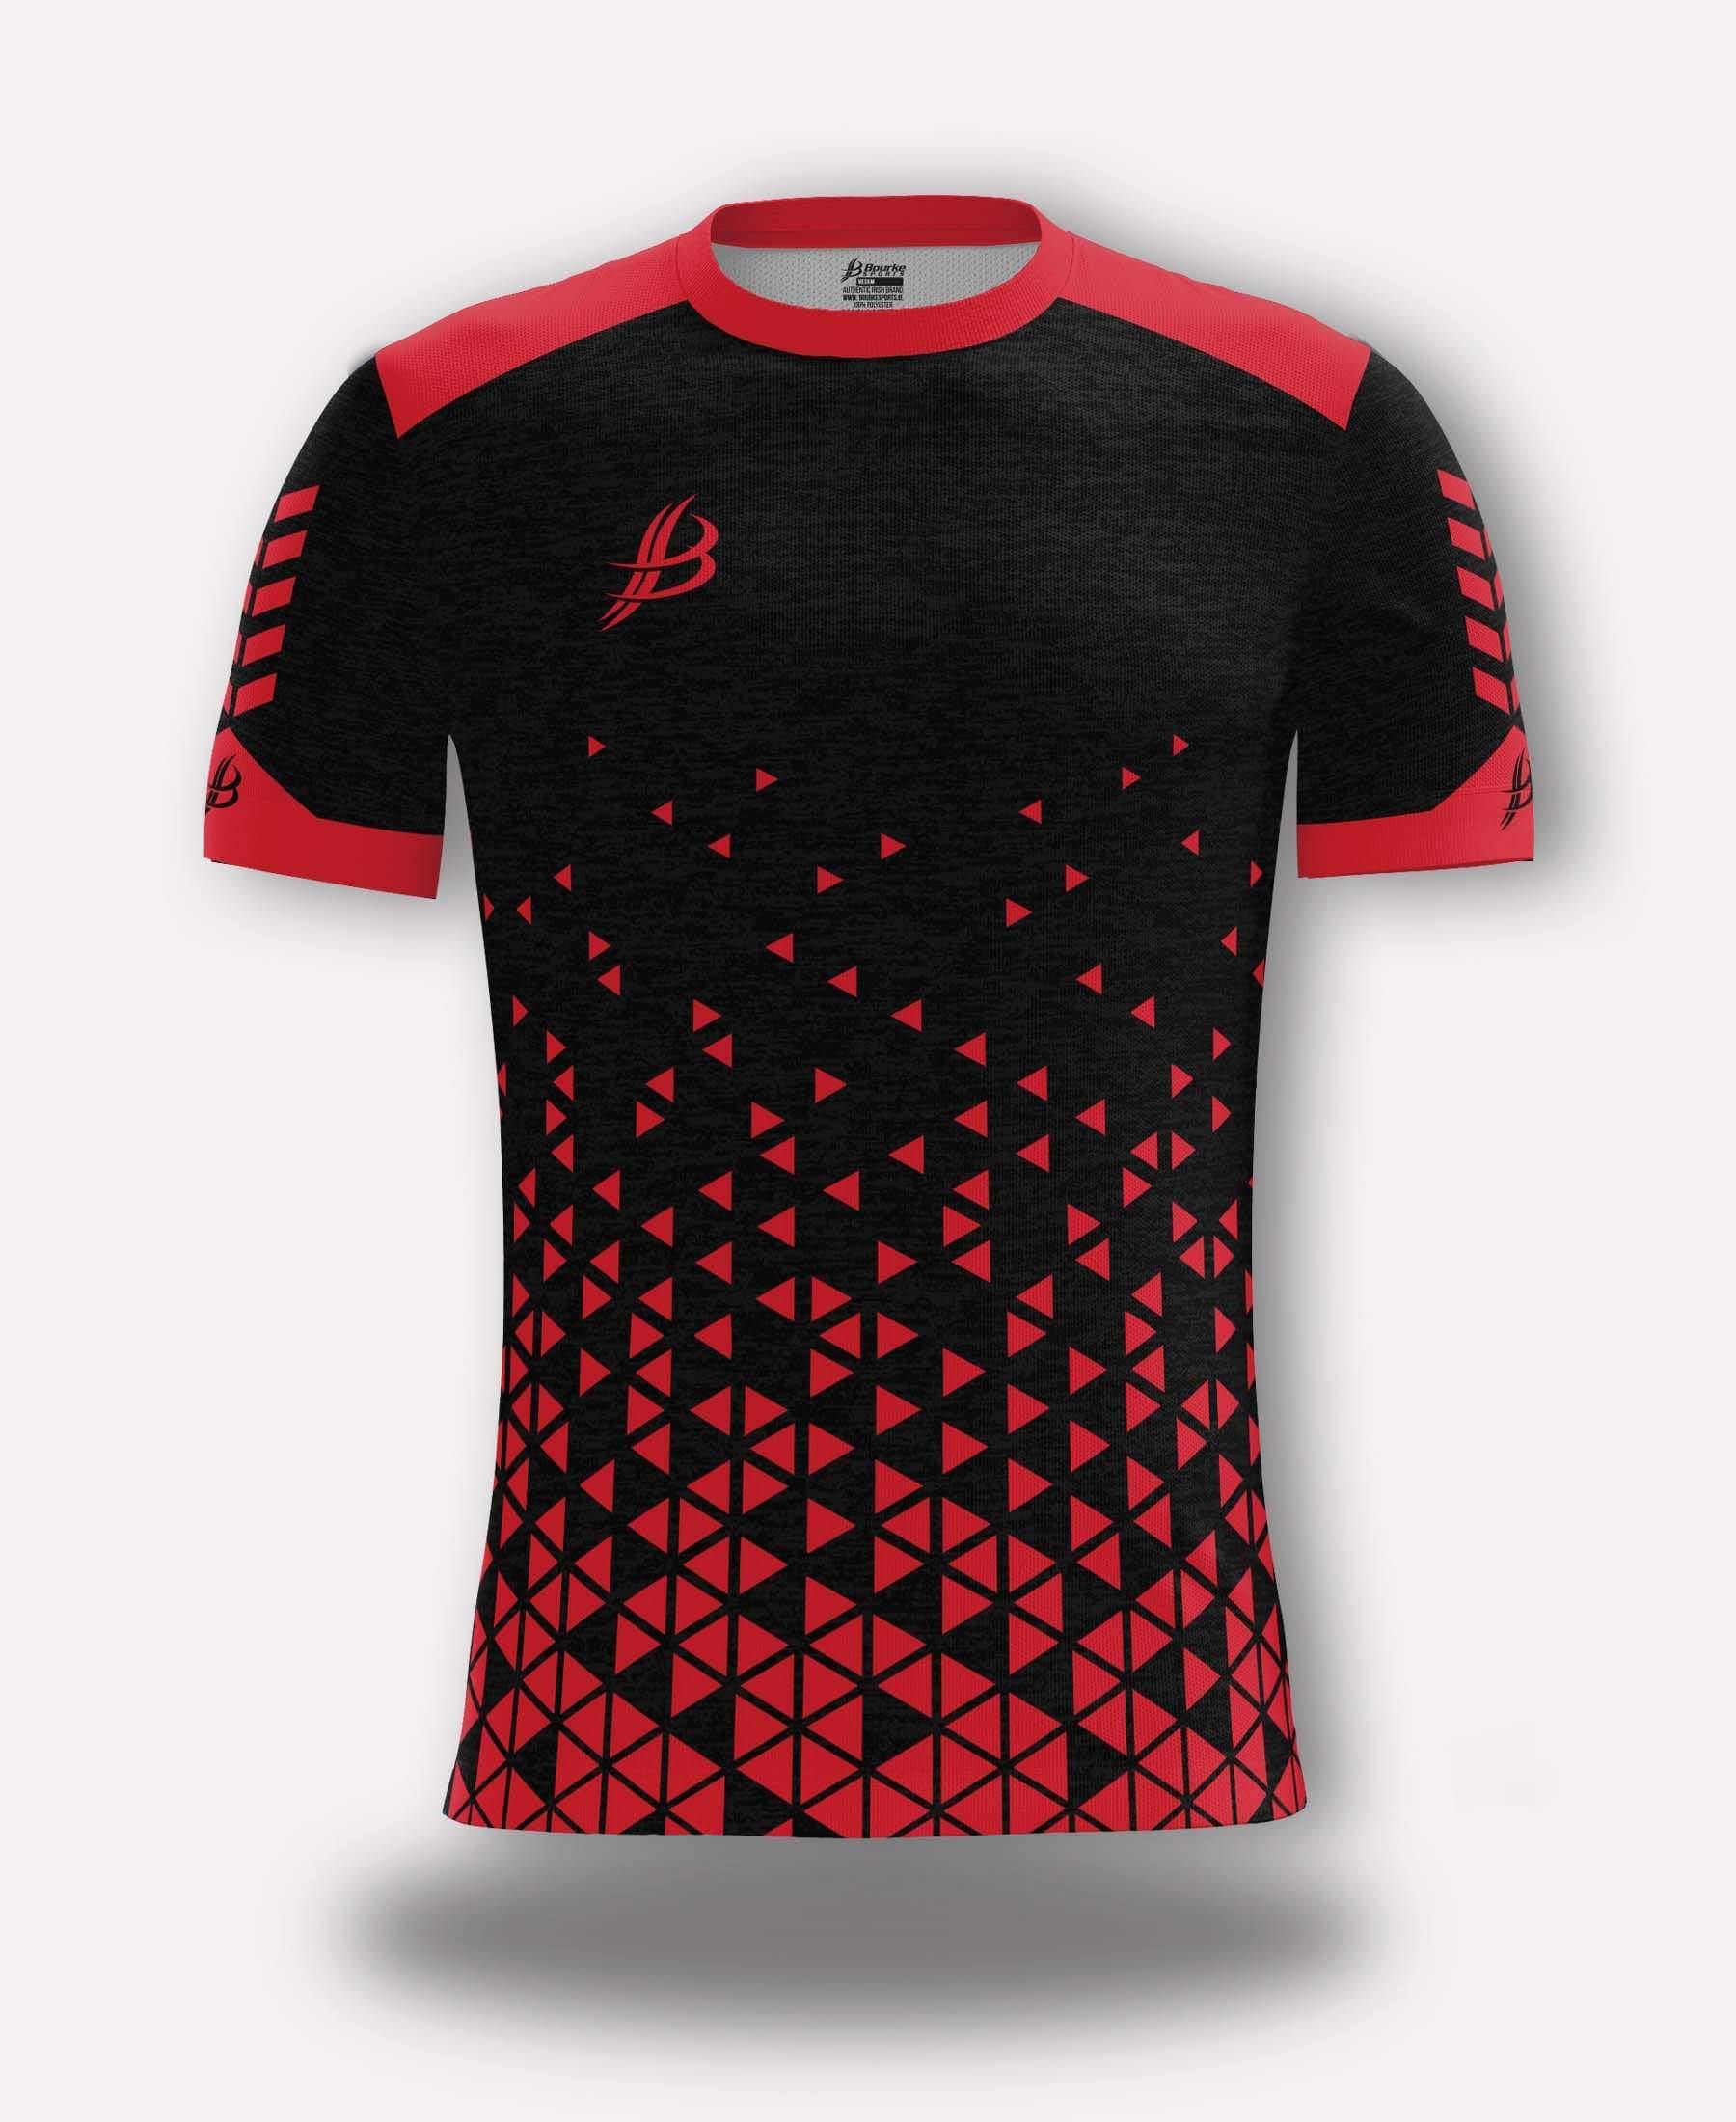 BUA20 Adult Jersey (Black/Red) - Bourke Sports Limited